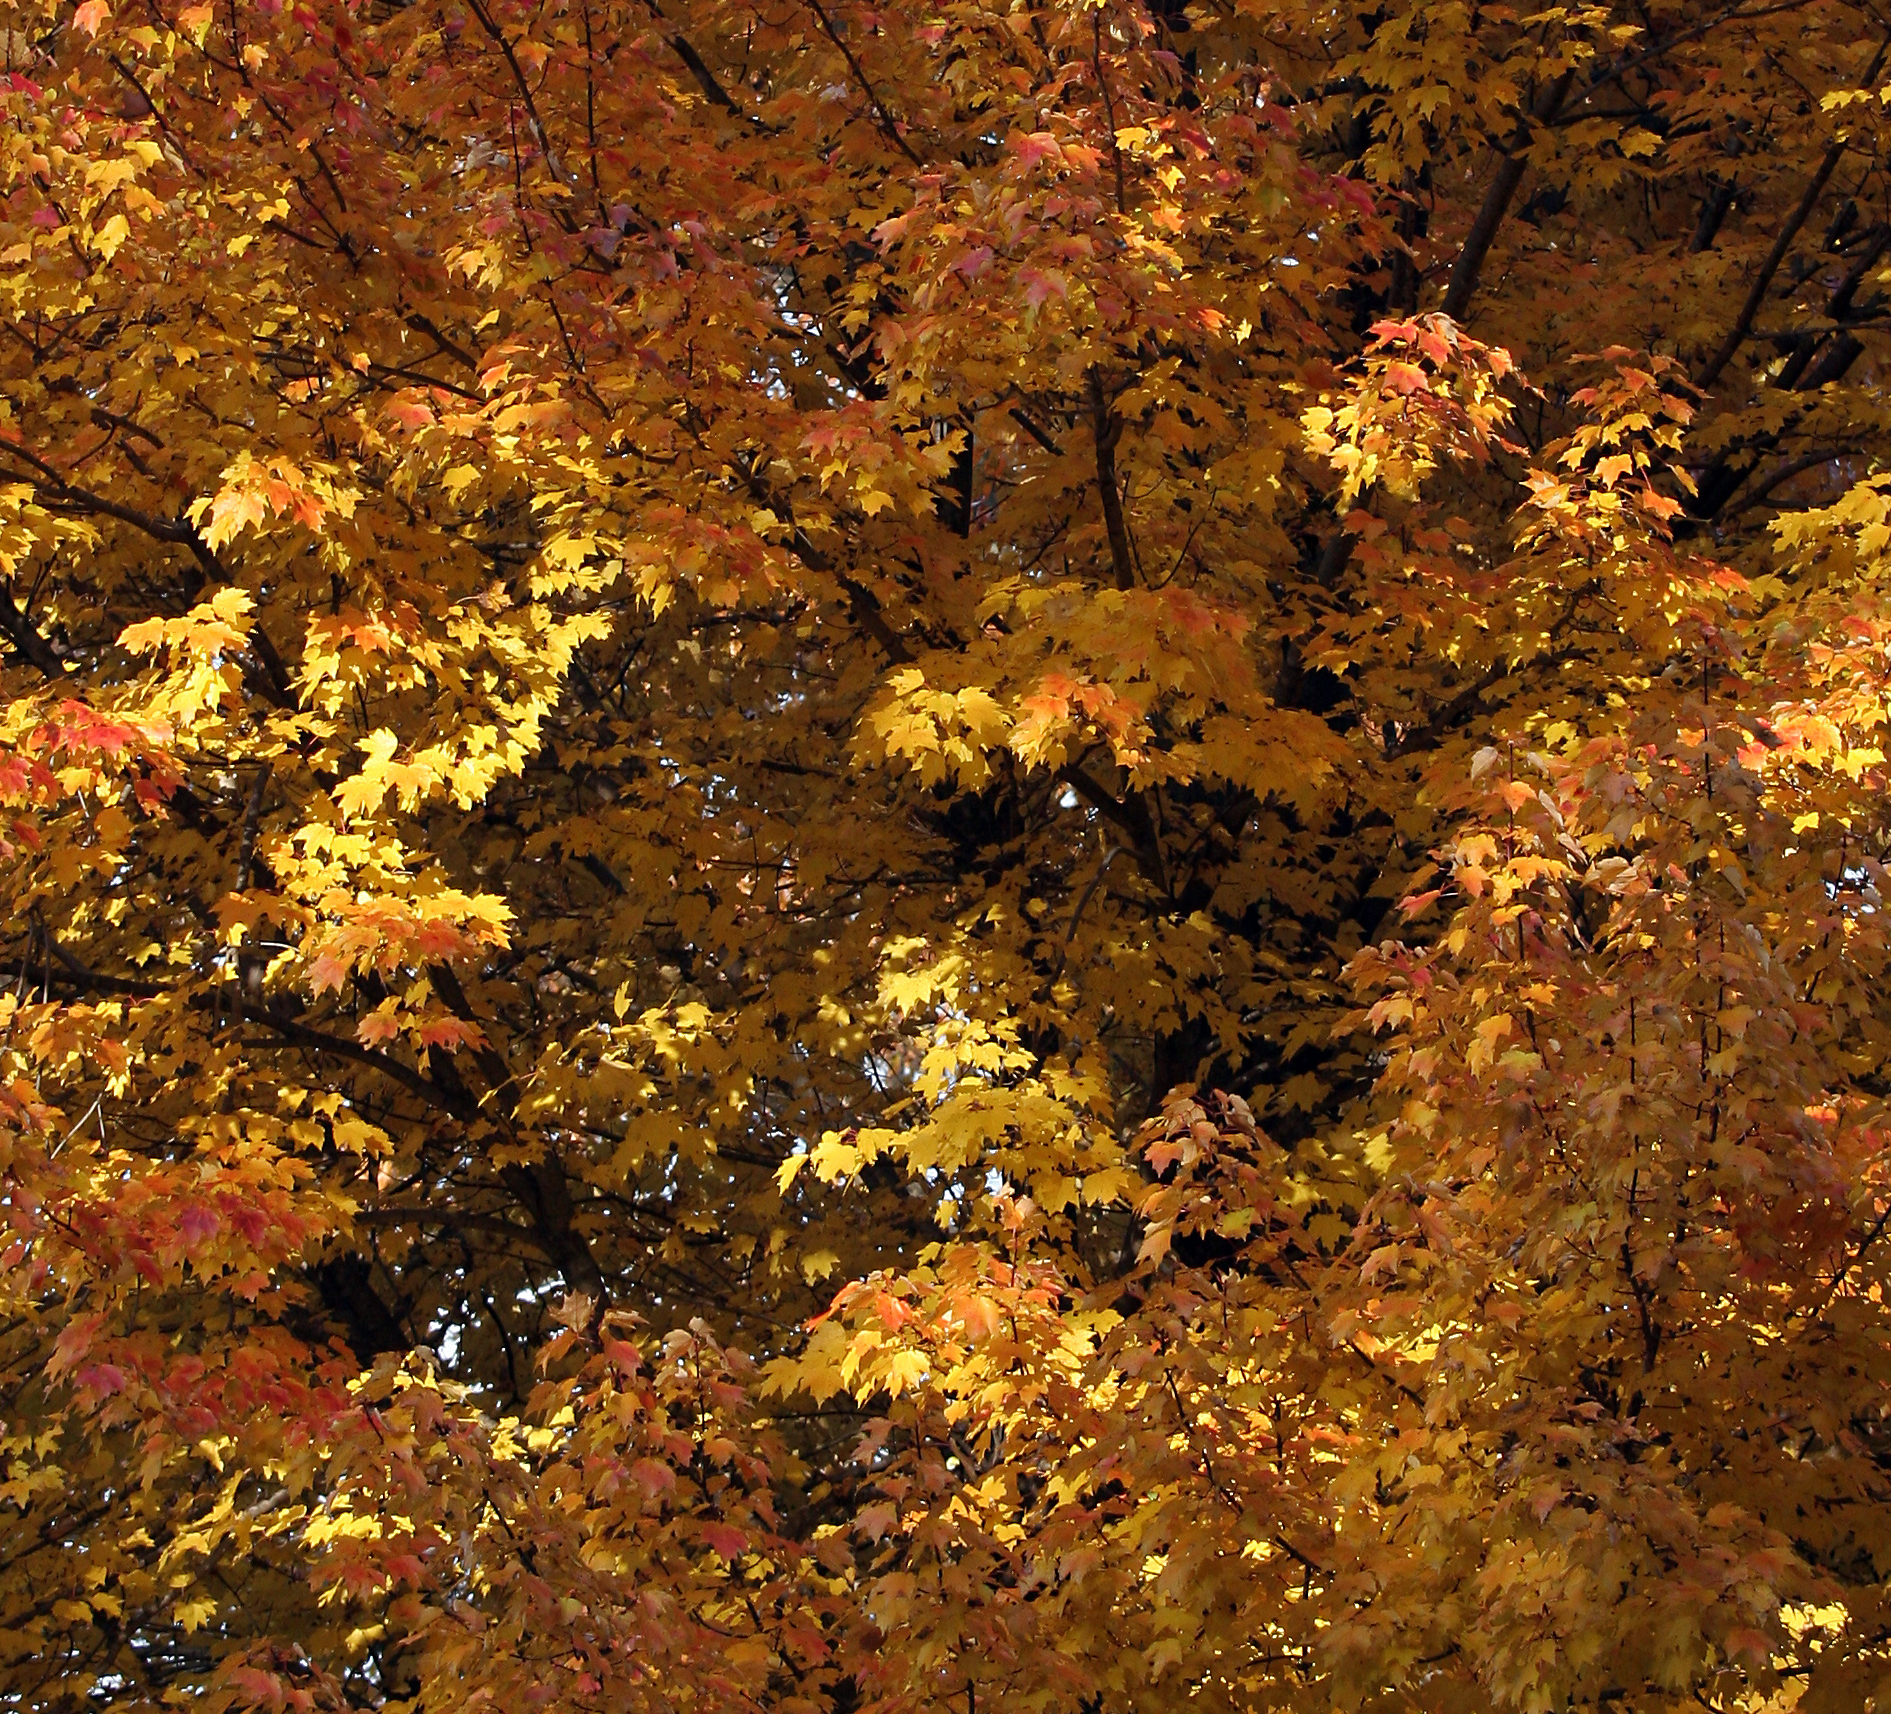 many different colored leaves stand out against the dark background